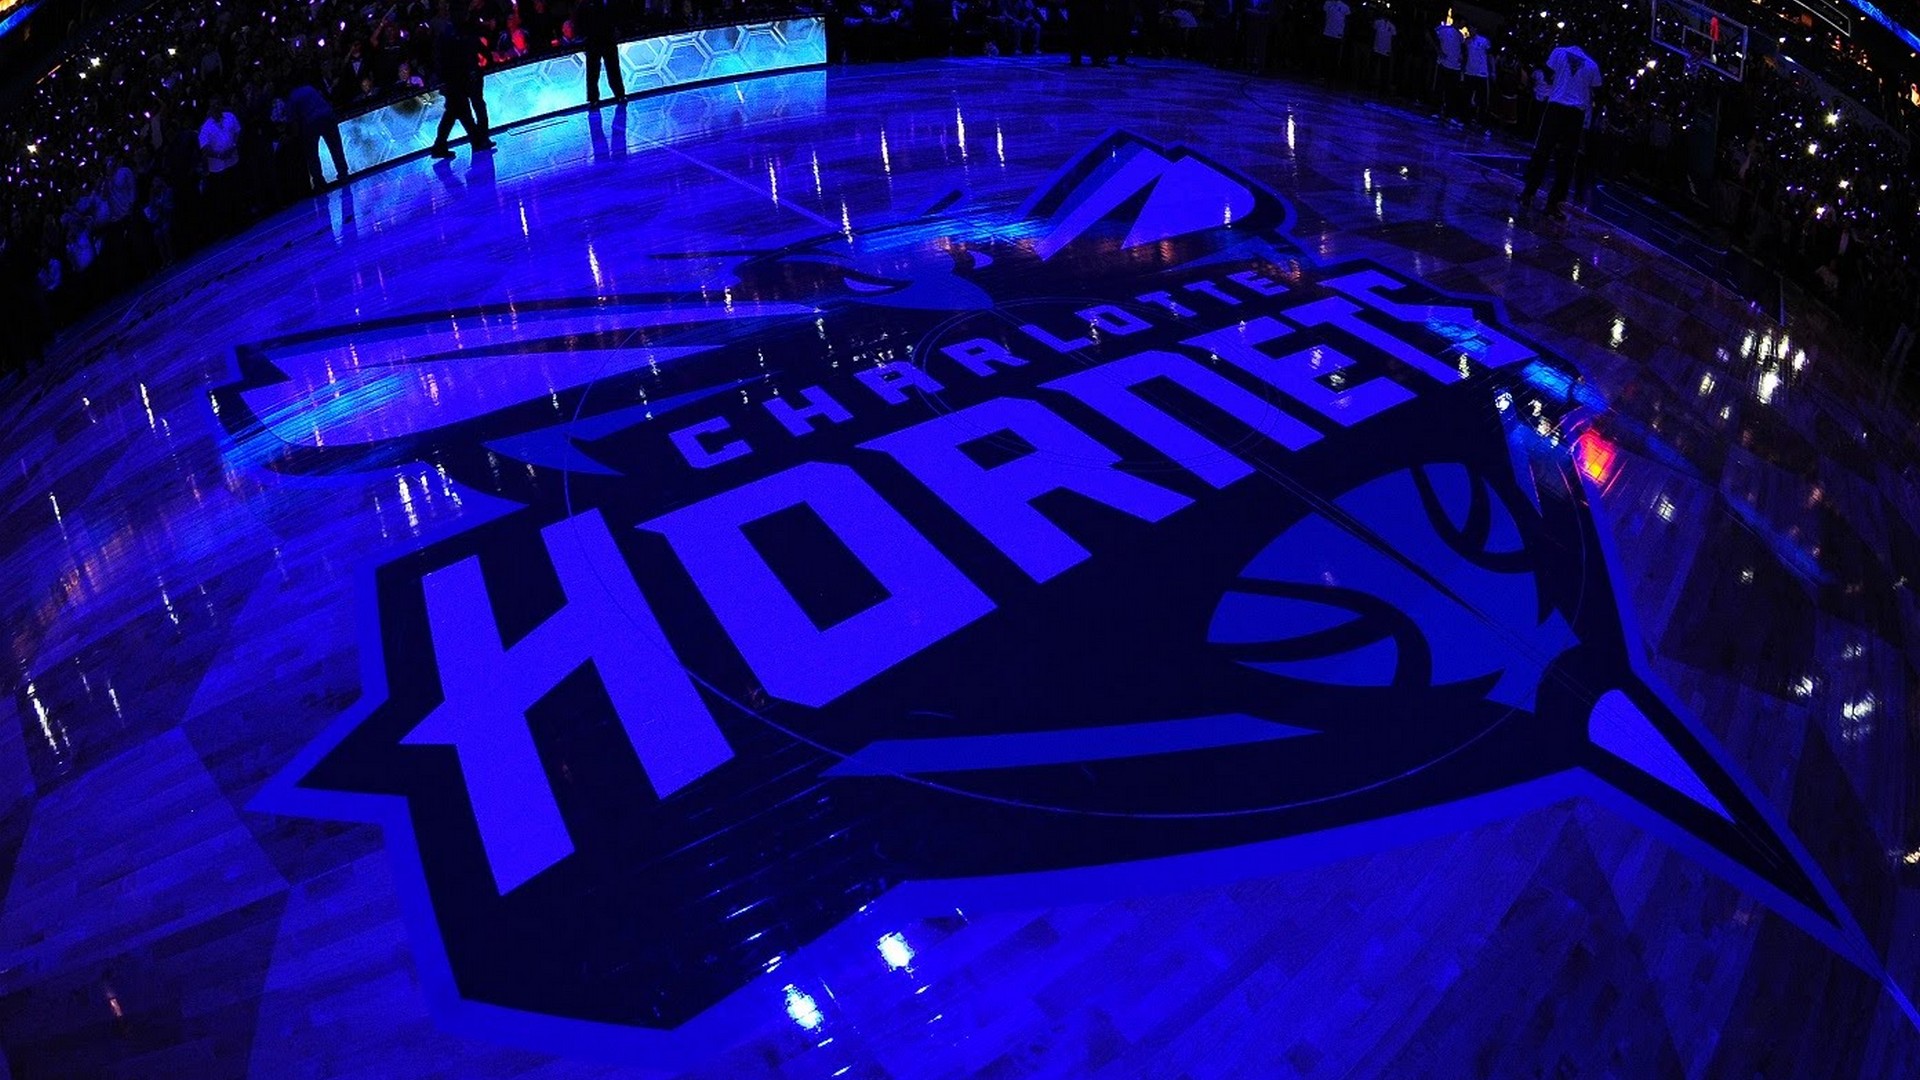 Windows Wallpaper Charlotte Hornets with high-resolution 1920x1080 pixel. You can use this wallpaper for your Desktop Computer Backgrounds, Windows or Mac Screensavers, iPhone Lock screen, Tablet or Android and another Mobile Phone device